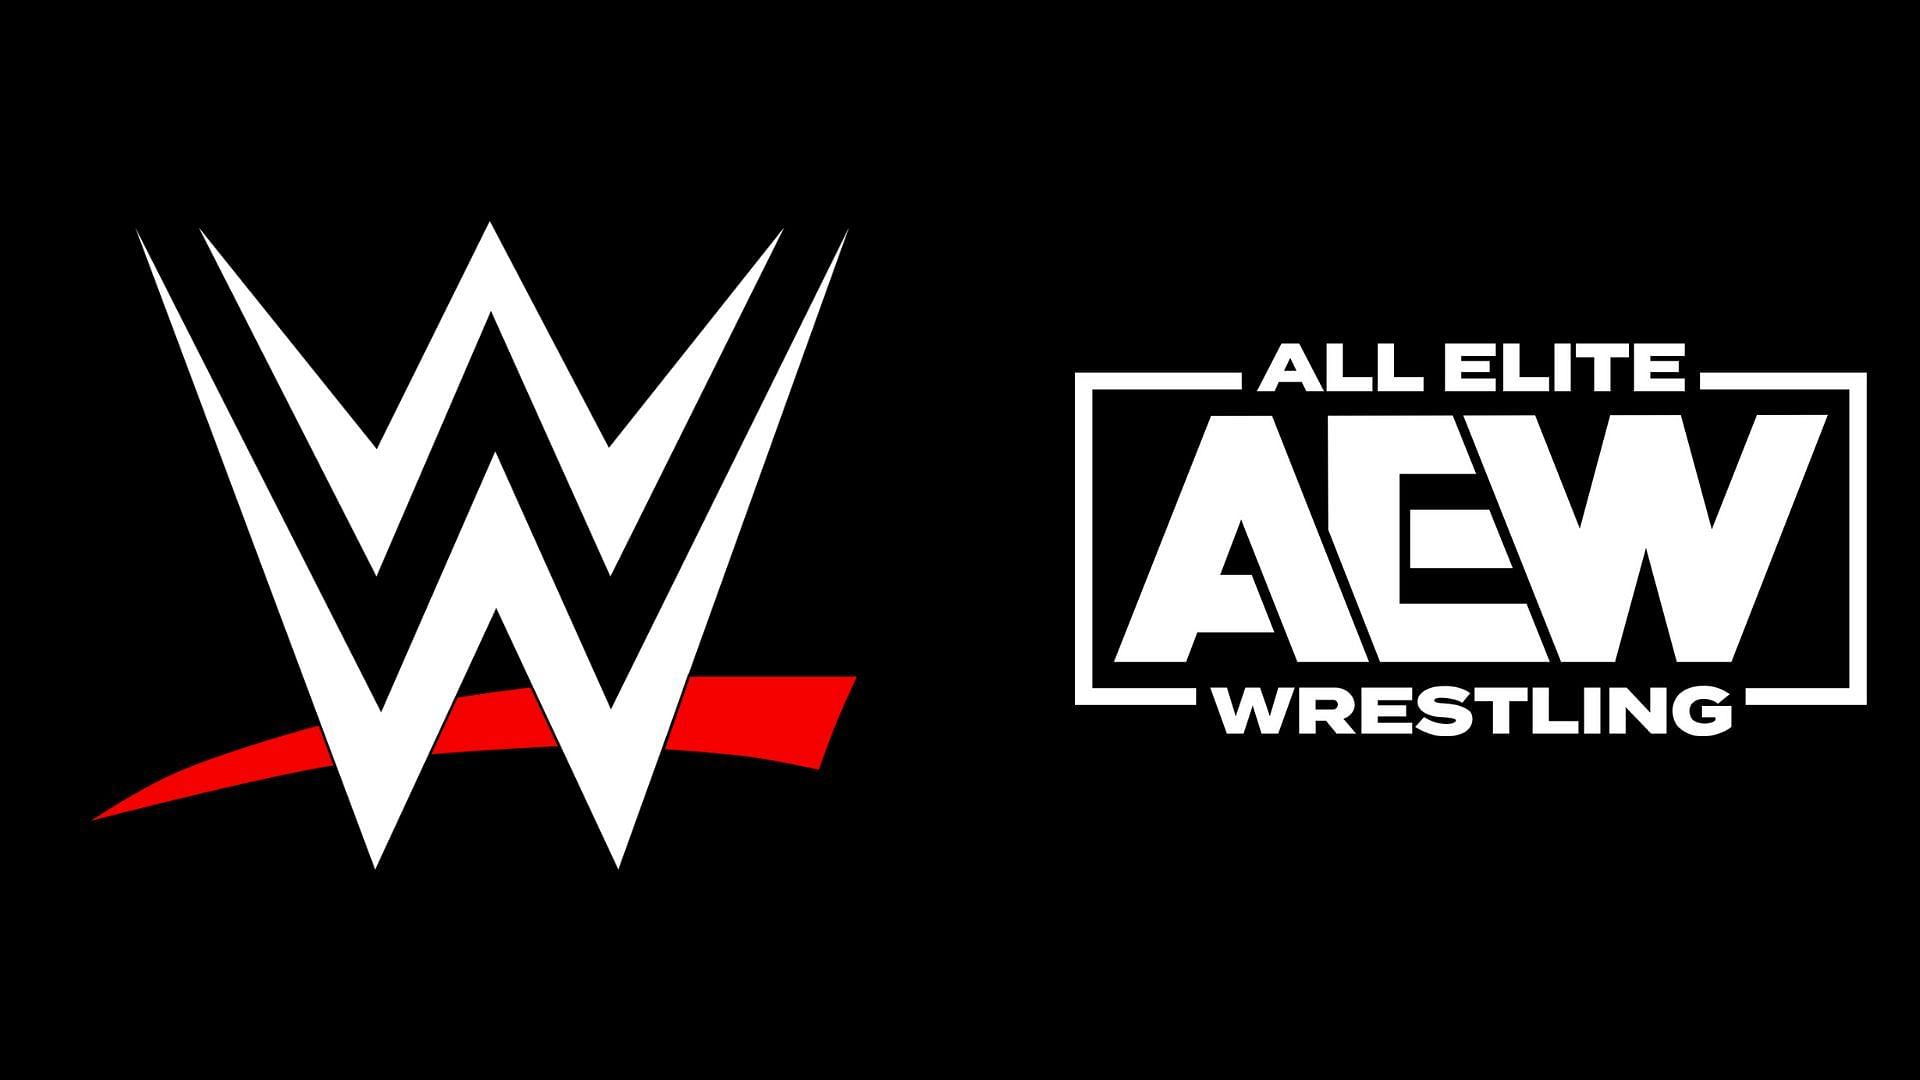 Will this former WWE name bring major changes to AEW